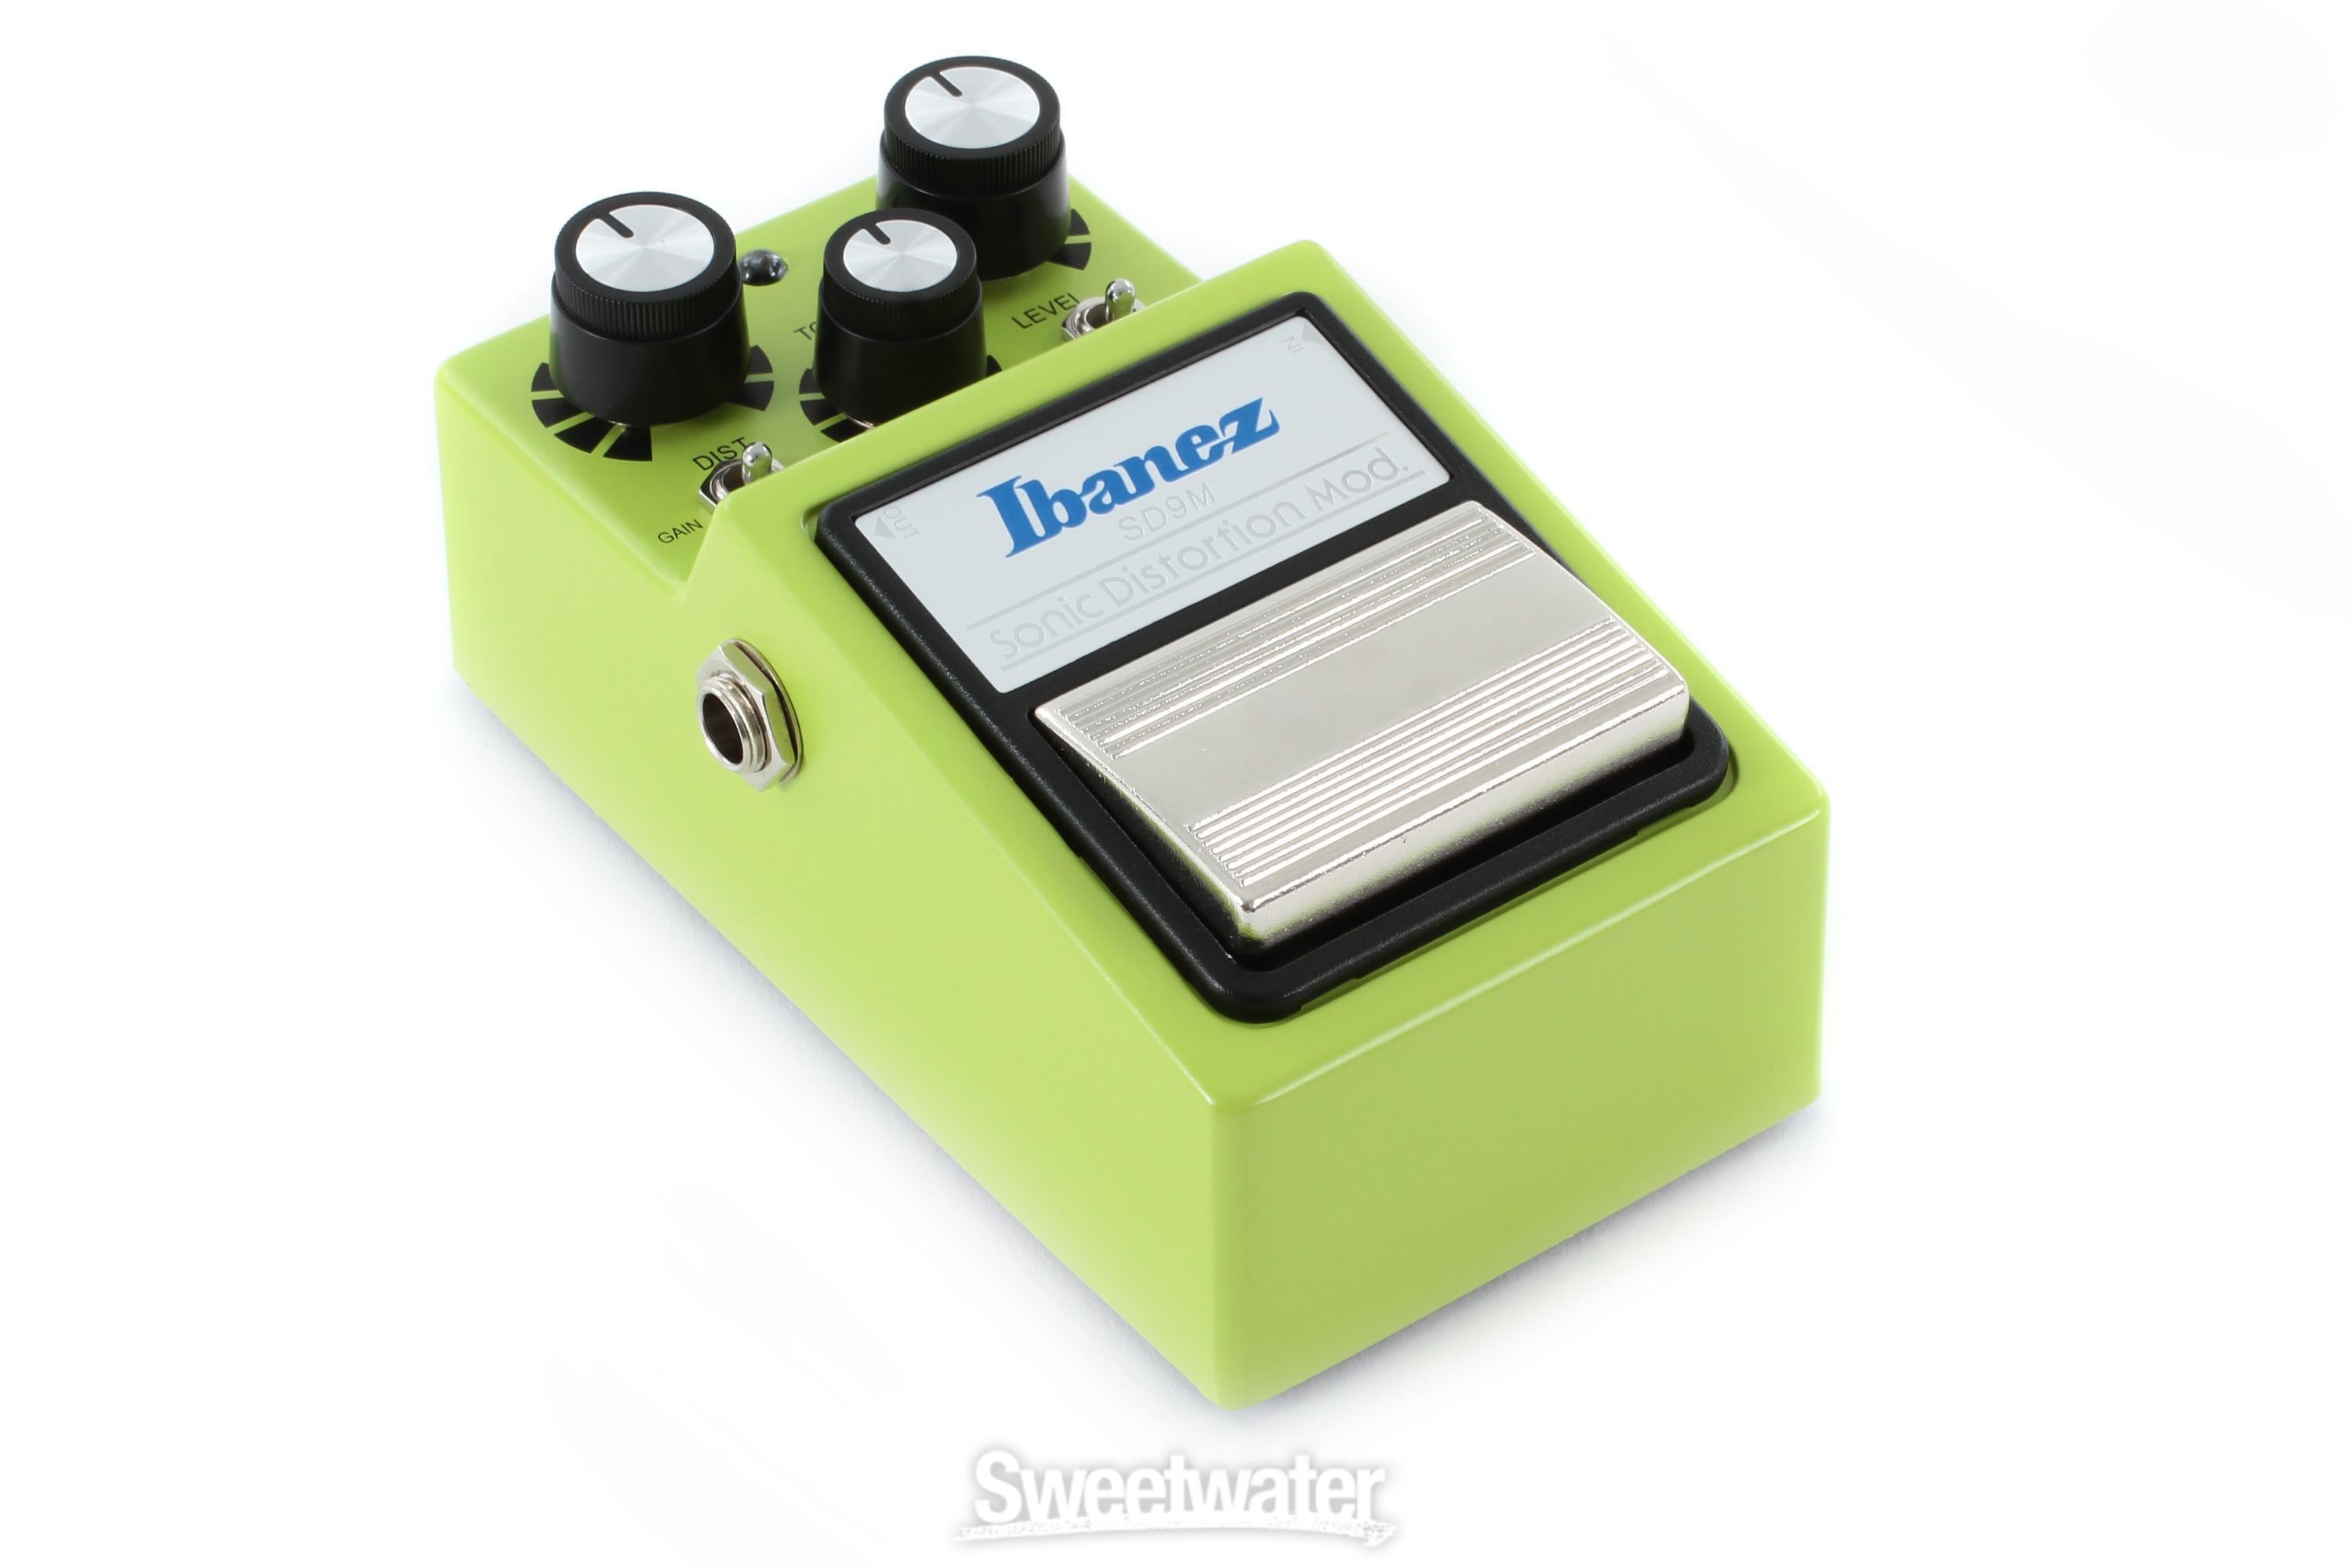 Ibanez SD9M Sonic Distortion Modified Distortion | Sweetwater